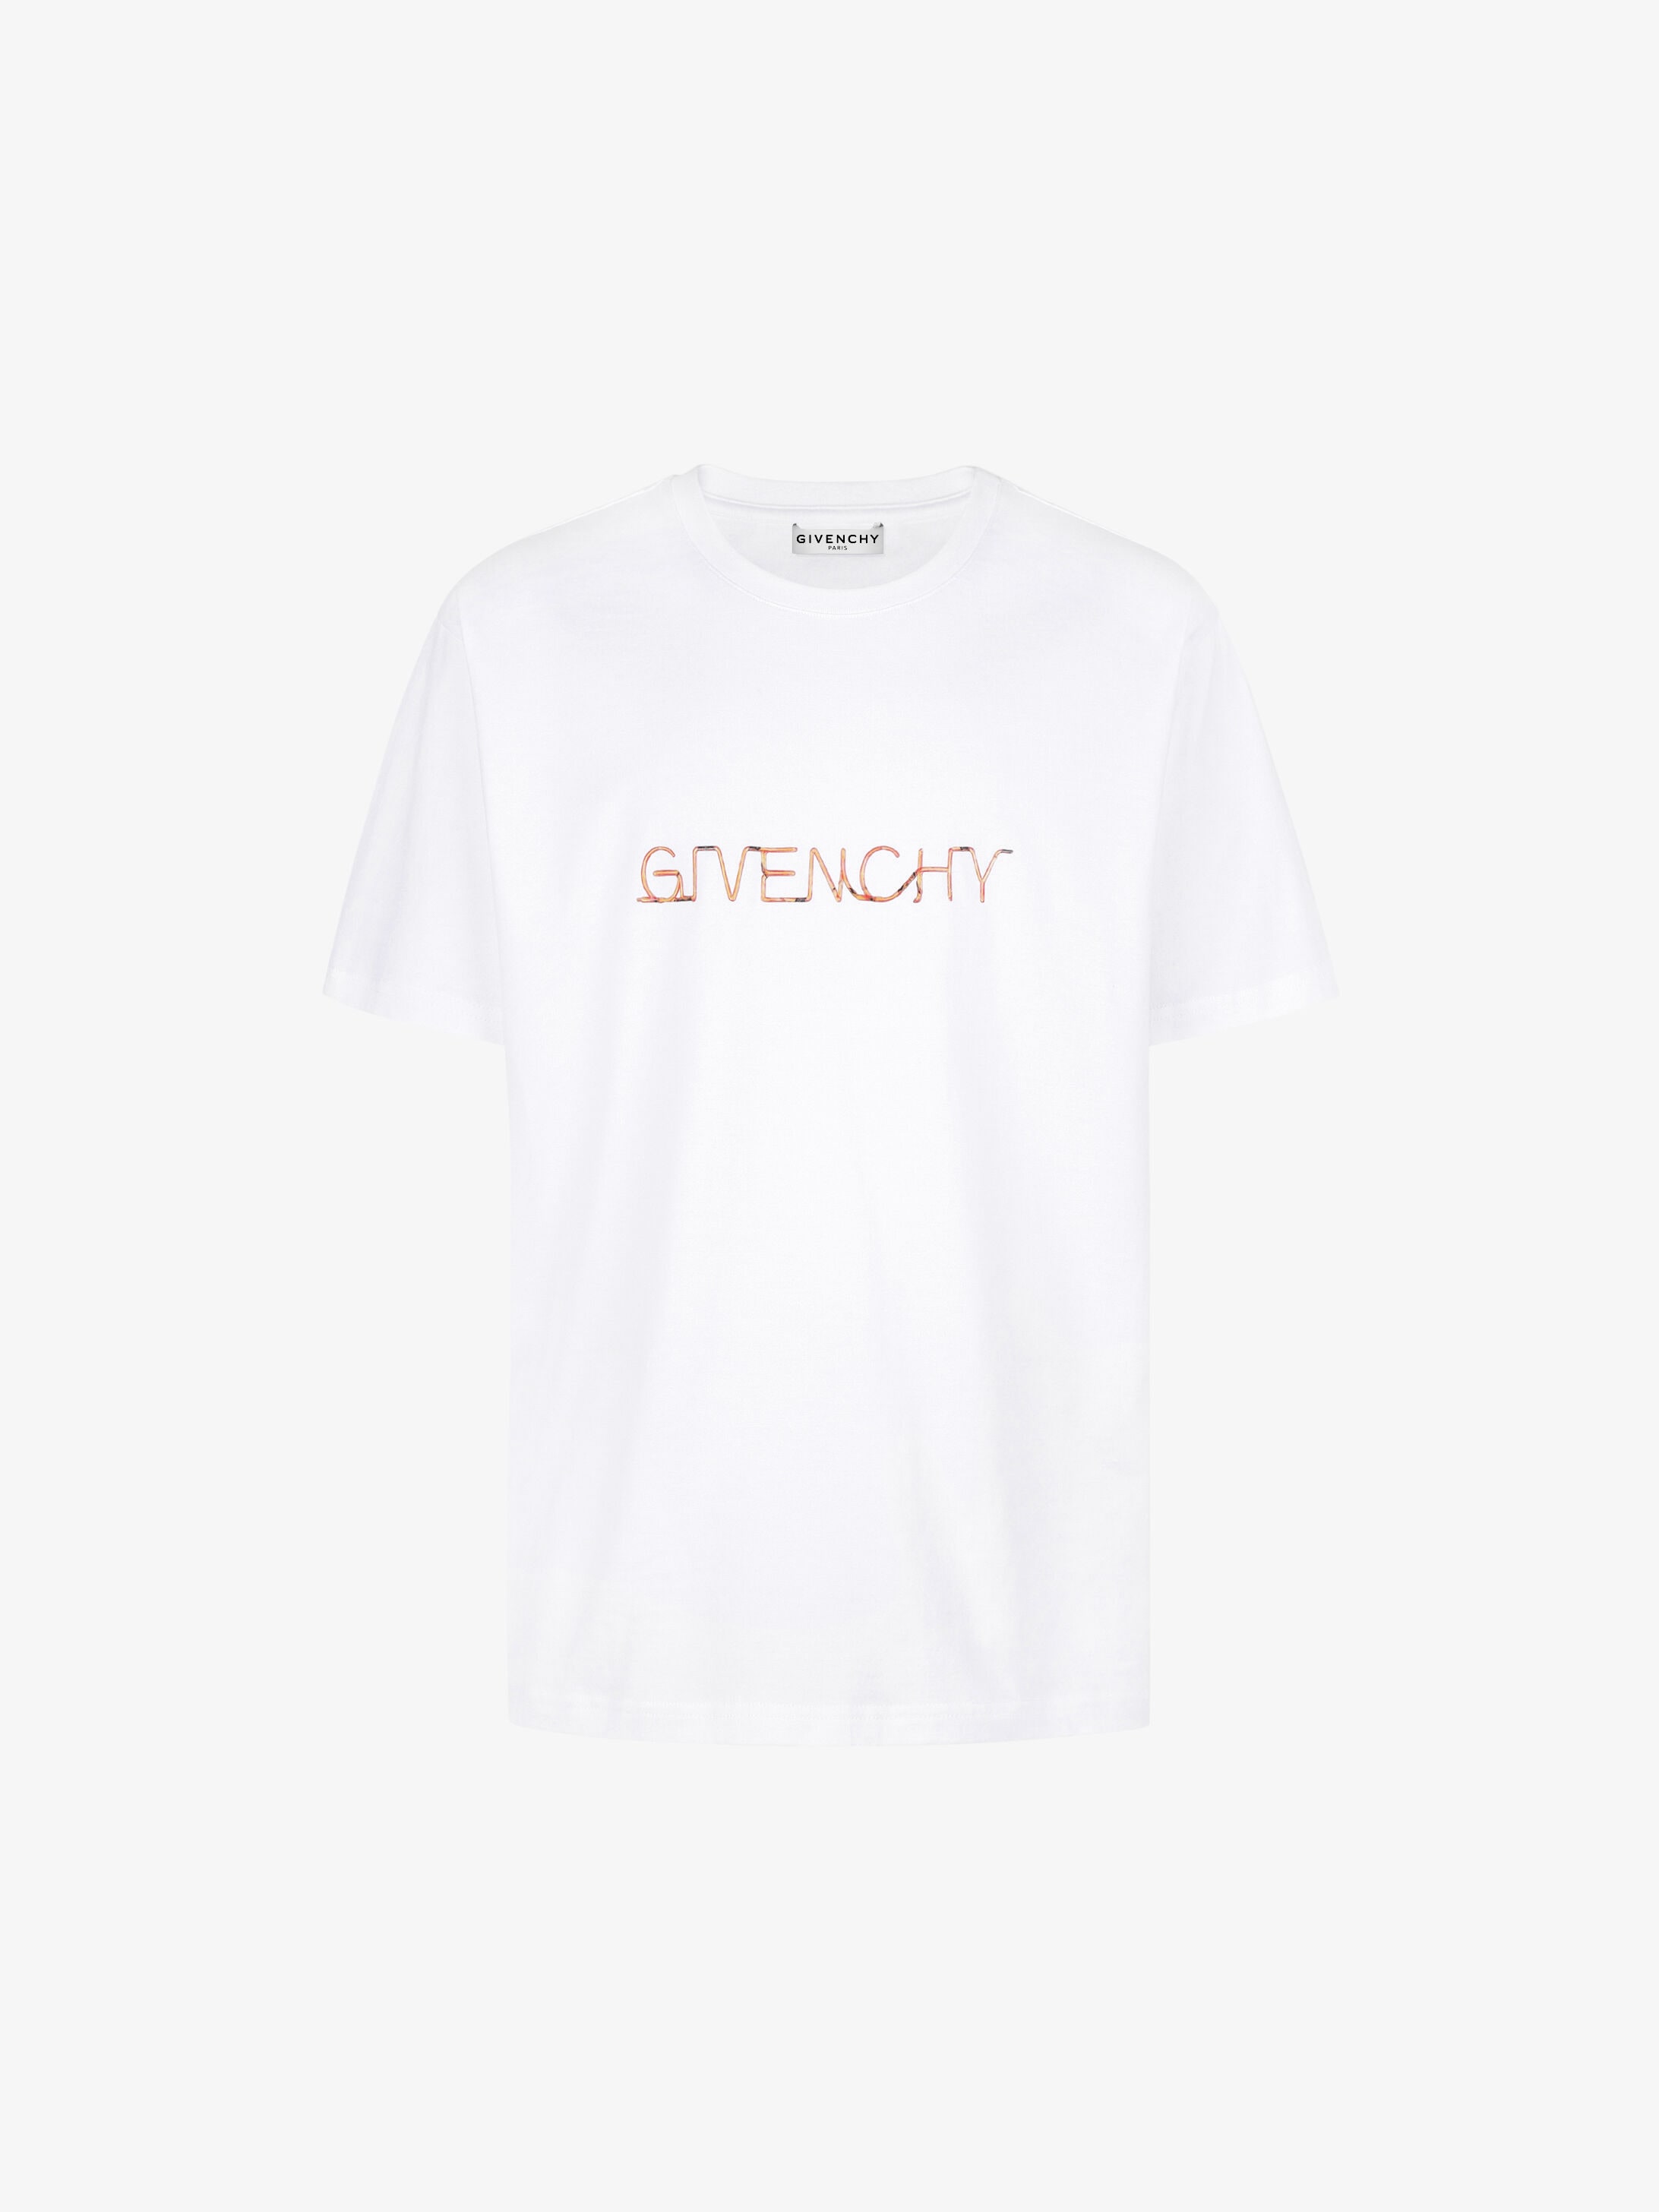 givenchy paris shirt price in india